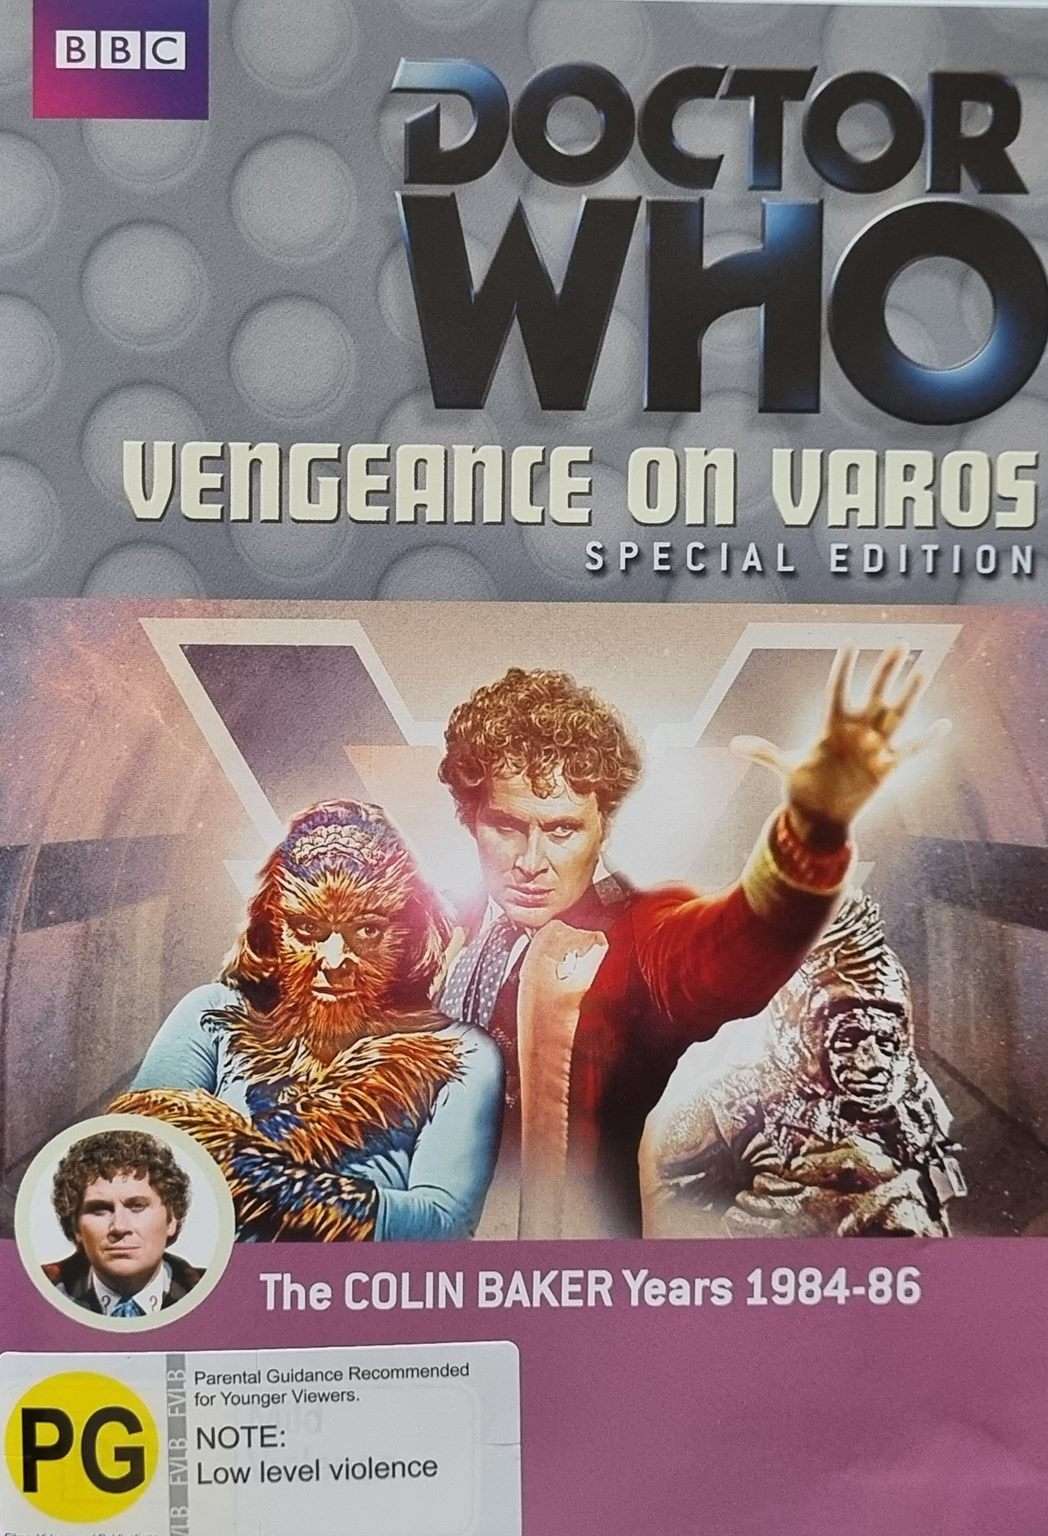 Doctor Who: Vengeance on Varos 2 Disc Special Edition